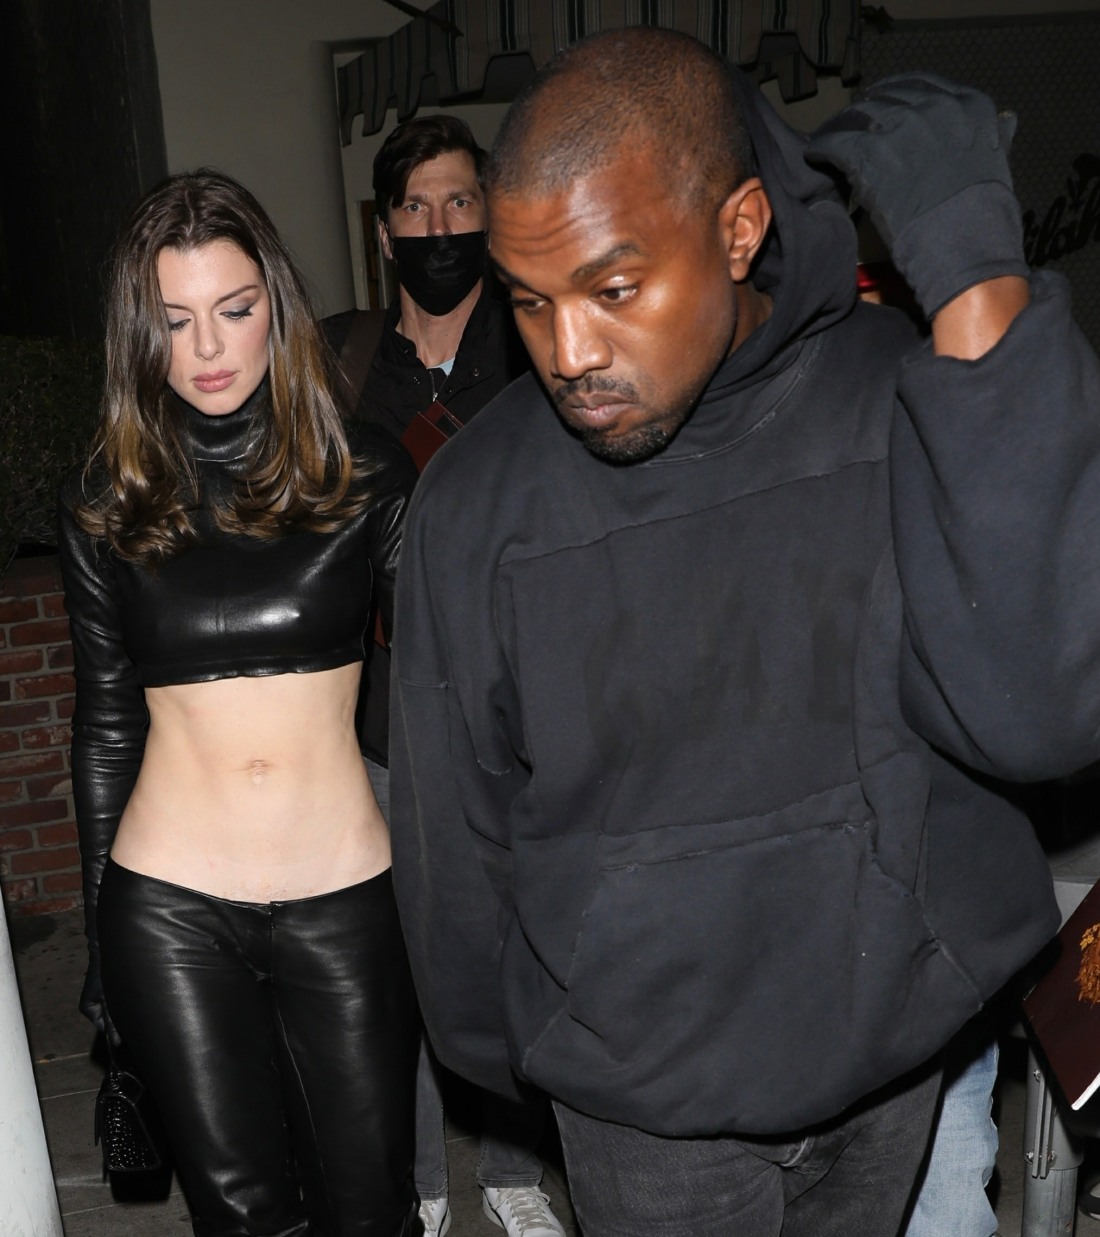 The man accusing Kanye West of assault is seen following behind him as the singer left Delilah with Julia Fox